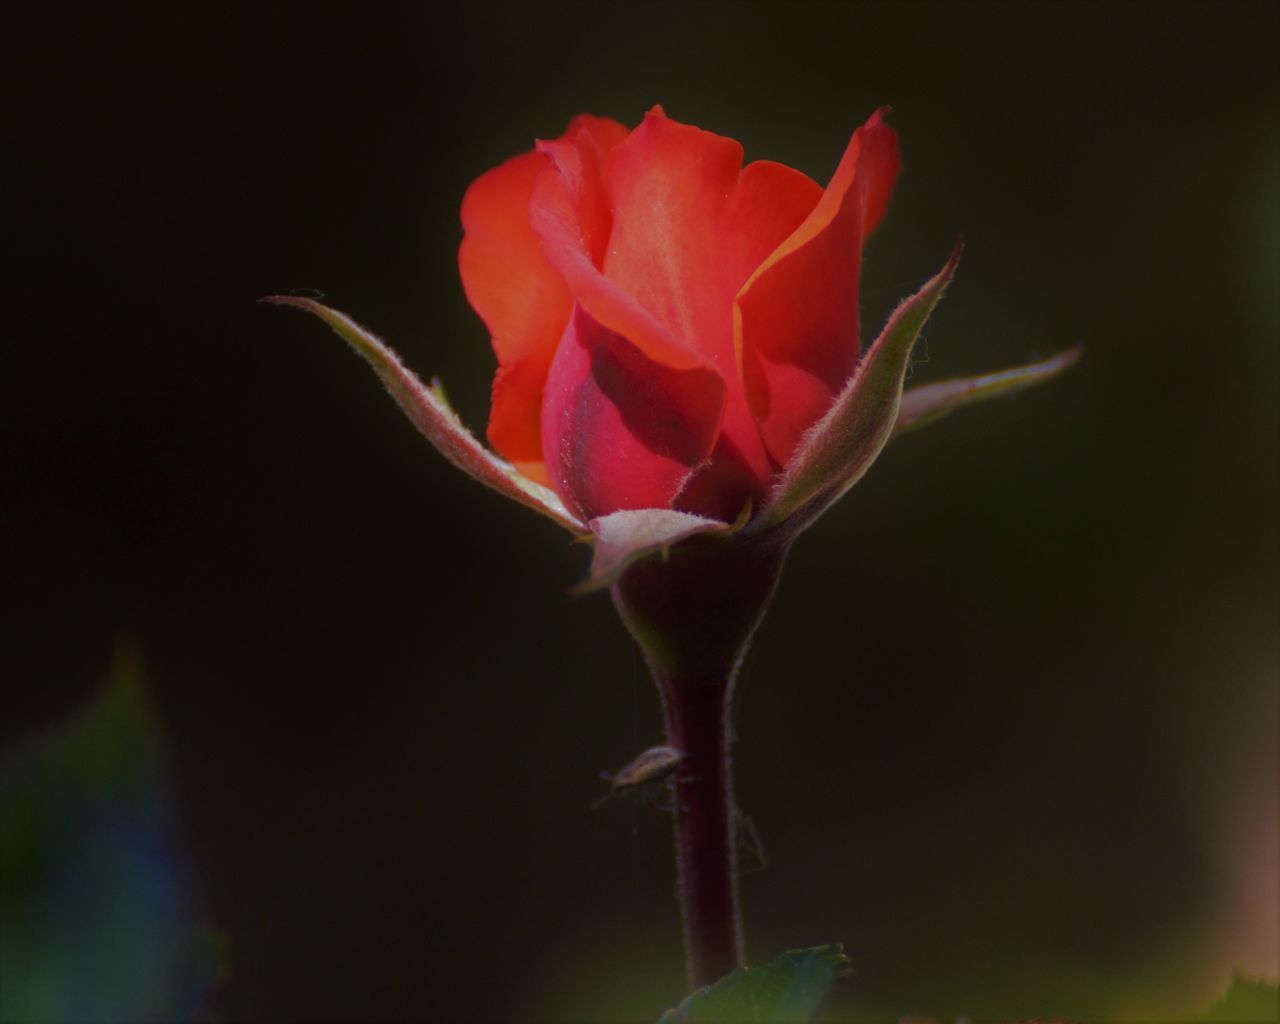 CLOSE-UP OF RED ROSE